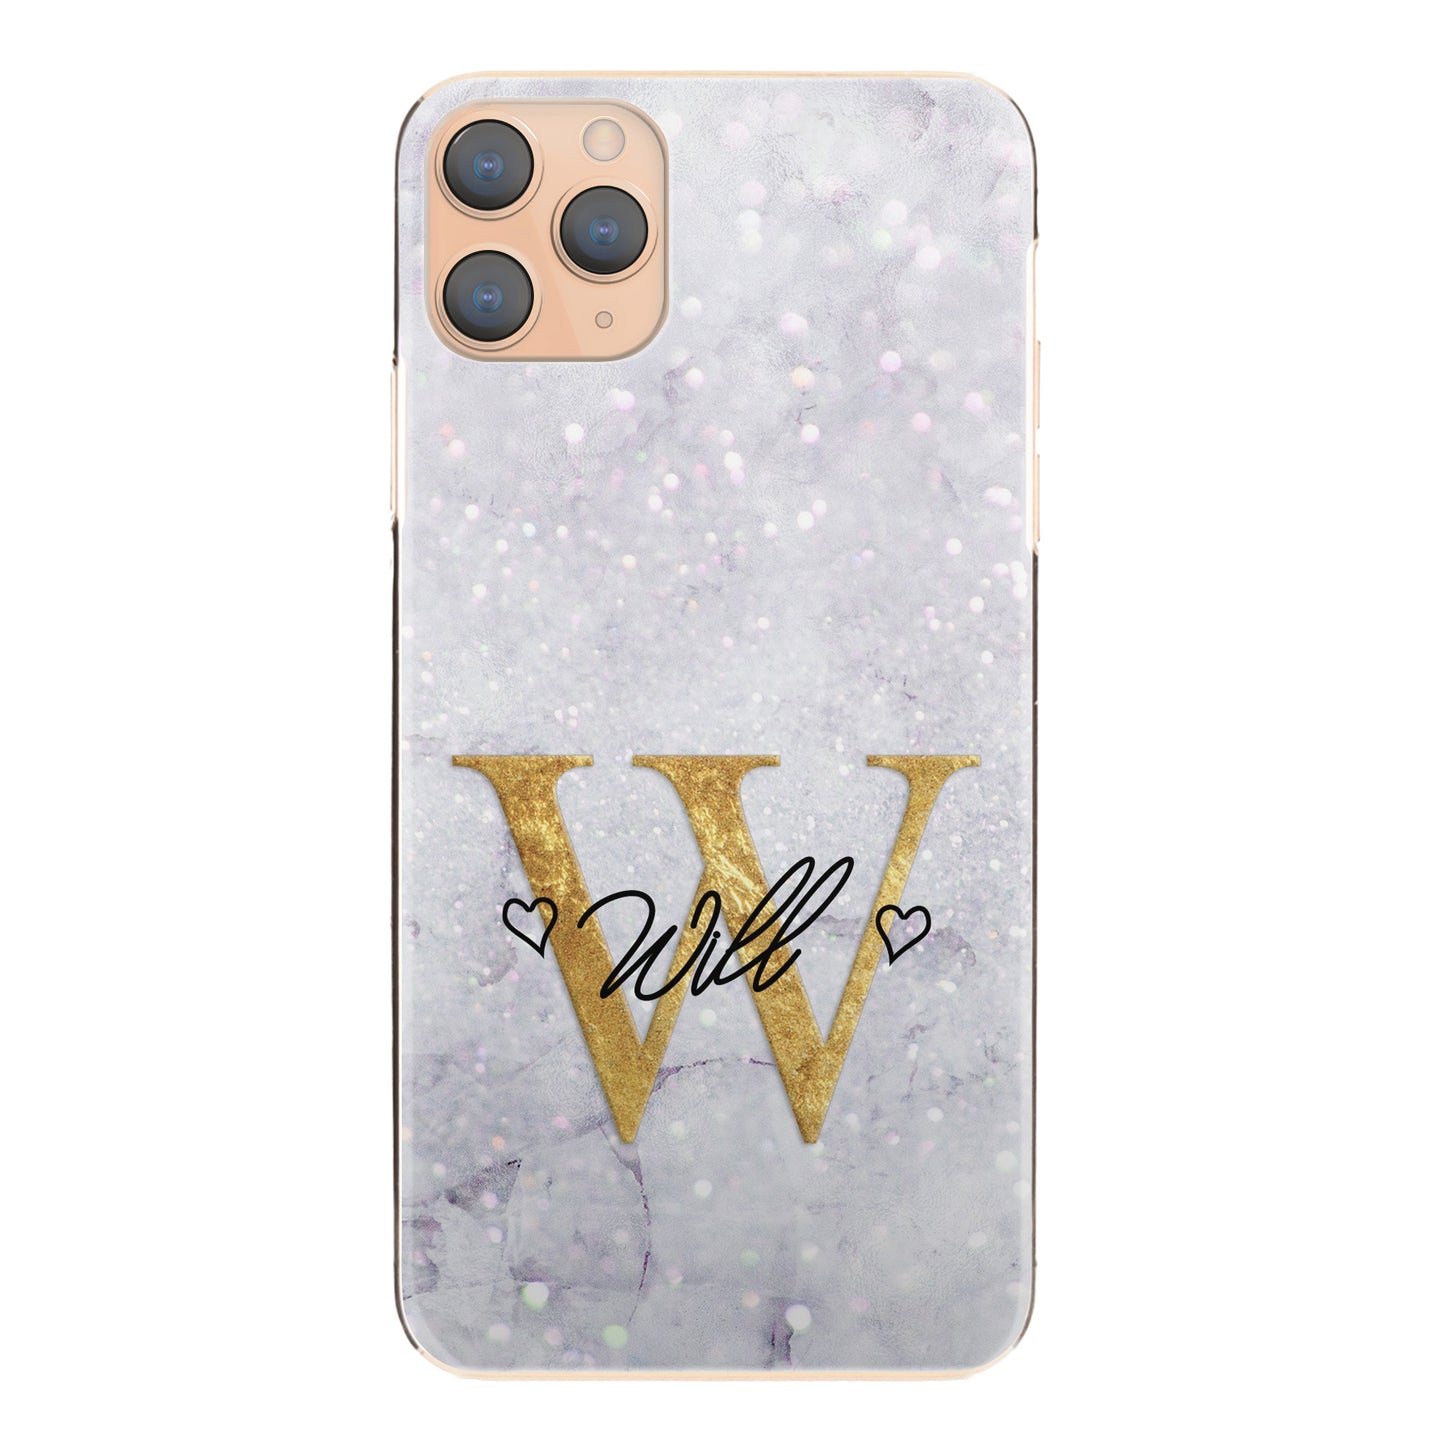 Personalised LG Phone Hard Case with Gold Initial and Heart Accented Text on Crystal Marble